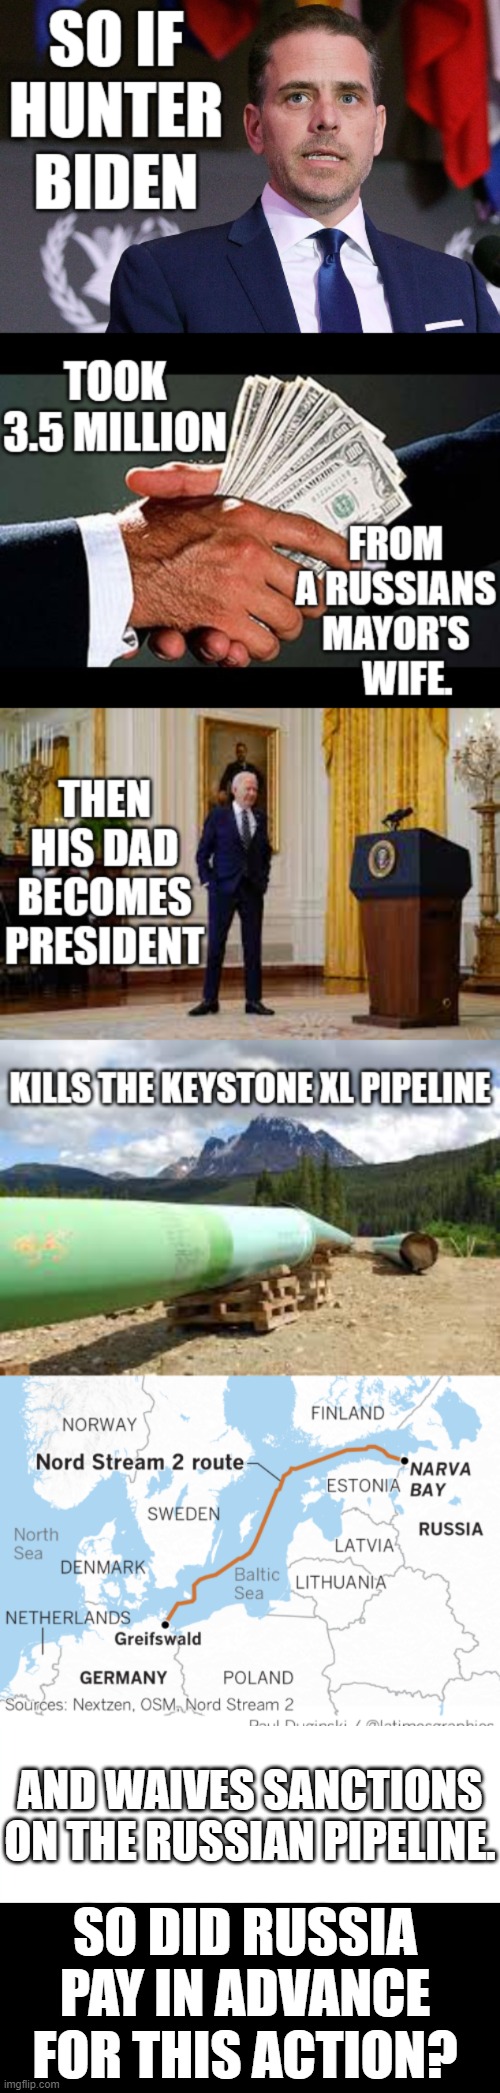 What Do You Think? | AND WAIVES SANCTIONS ON THE RUSSIAN PIPELINE. SO DID RUSSIA PAY IN ADVANCE FOR THIS ACTION? | image tagged in memes,politics,hunter,joe biden,russia,pay in advance | made w/ Imgflip meme maker